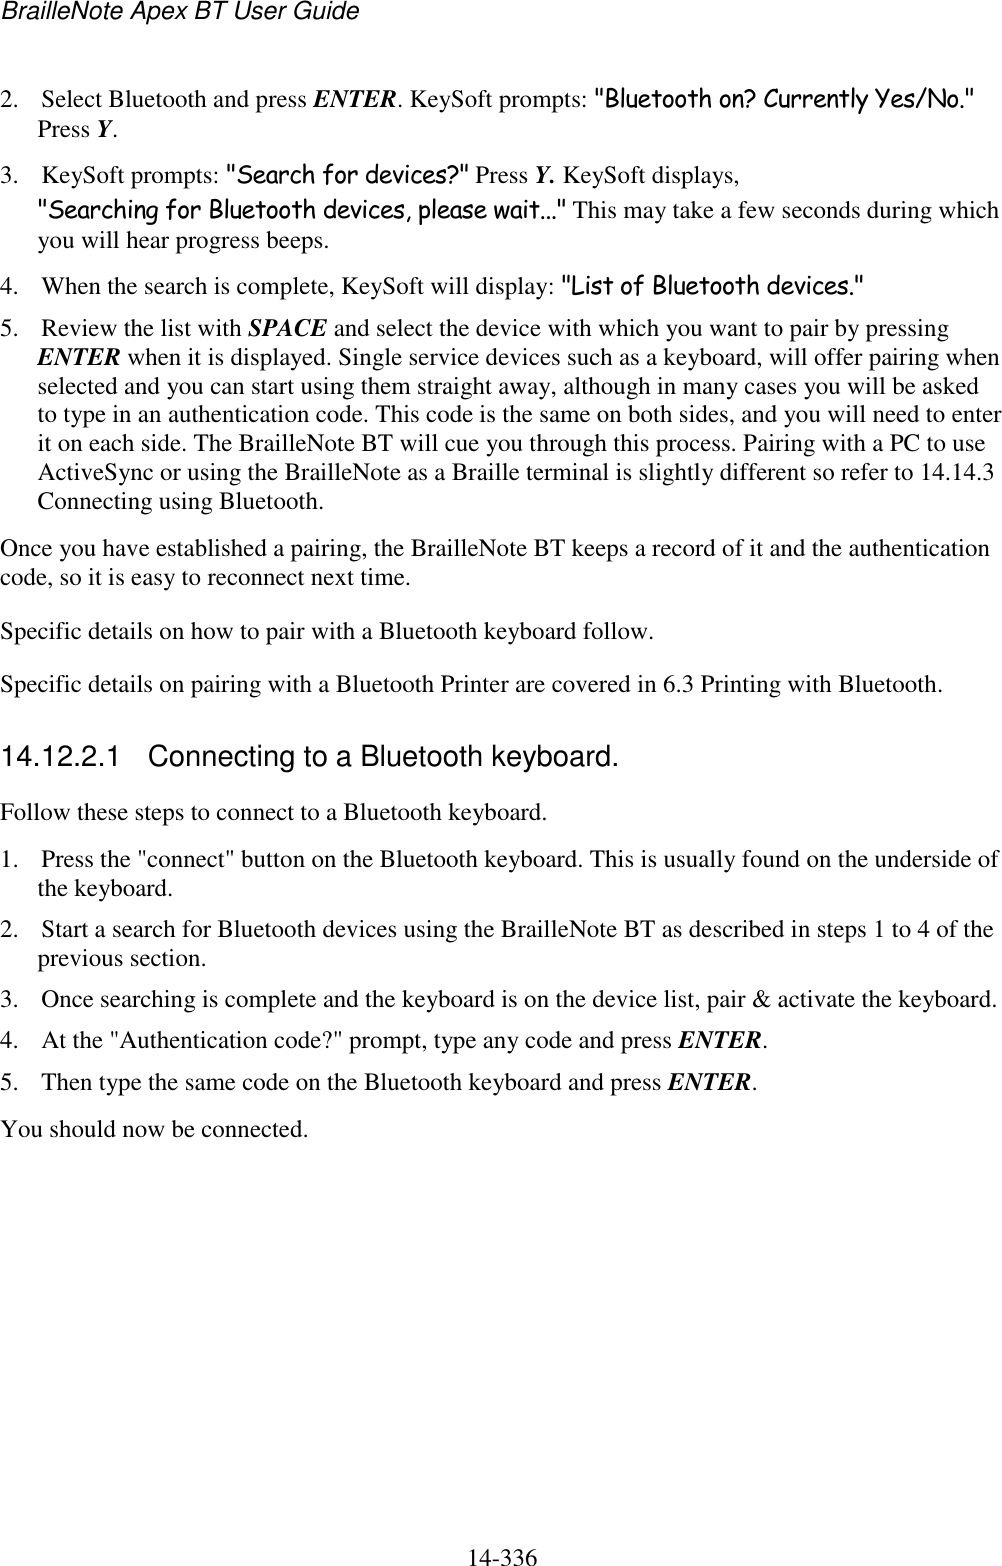 BrailleNote Apex BT User Guide   14-336   2. Select Bluetooth and press ENTER. KeySoft prompts: &quot;Bluetooth on? Currently Yes/No.&quot; Press Y. 3. KeySoft prompts: &quot;Search for devices?&quot; Press Y. KeySoft displays, &quot;Searching for Bluetooth devices, please wait...&quot; This may take a few seconds during which you will hear progress beeps. 4. When the search is complete, KeySoft will display: &quot;List of Bluetooth devices.&quot;  5. Review the list with SPACE and select the device with which you want to pair by pressing ENTER when it is displayed. Single service devices such as a keyboard, will offer pairing when selected and you can start using them straight away, although in many cases you will be asked to type in an authentication code. This code is the same on both sides, and you will need to enter it on each side. The BrailleNote BT will cue you through this process. Pairing with a PC to use ActiveSync or using the BrailleNote as a Braille terminal is slightly different so refer to 14.14.3 Connecting using Bluetooth. Once you have established a pairing, the BrailleNote BT keeps a record of it and the authentication code, so it is easy to reconnect next time. Specific details on how to pair with a Bluetooth keyboard follow.  Specific details on pairing with a Bluetooth Printer are covered in 6.3 Printing with Bluetooth.  14.12.2.1  Connecting to a Bluetooth keyboard. Follow these steps to connect to a Bluetooth keyboard. 1. Press the &quot;connect&quot; button on the Bluetooth keyboard. This is usually found on the underside of the keyboard. 2. Start a search for Bluetooth devices using the BrailleNote BT as described in steps 1 to 4 of the previous section. 3. Once searching is complete and the keyboard is on the device list, pair &amp; activate the keyboard. 4. At the &quot;Authentication code?&quot; prompt, type any code and press ENTER. 5. Then type the same code on the Bluetooth keyboard and press ENTER. You should now be connected.   